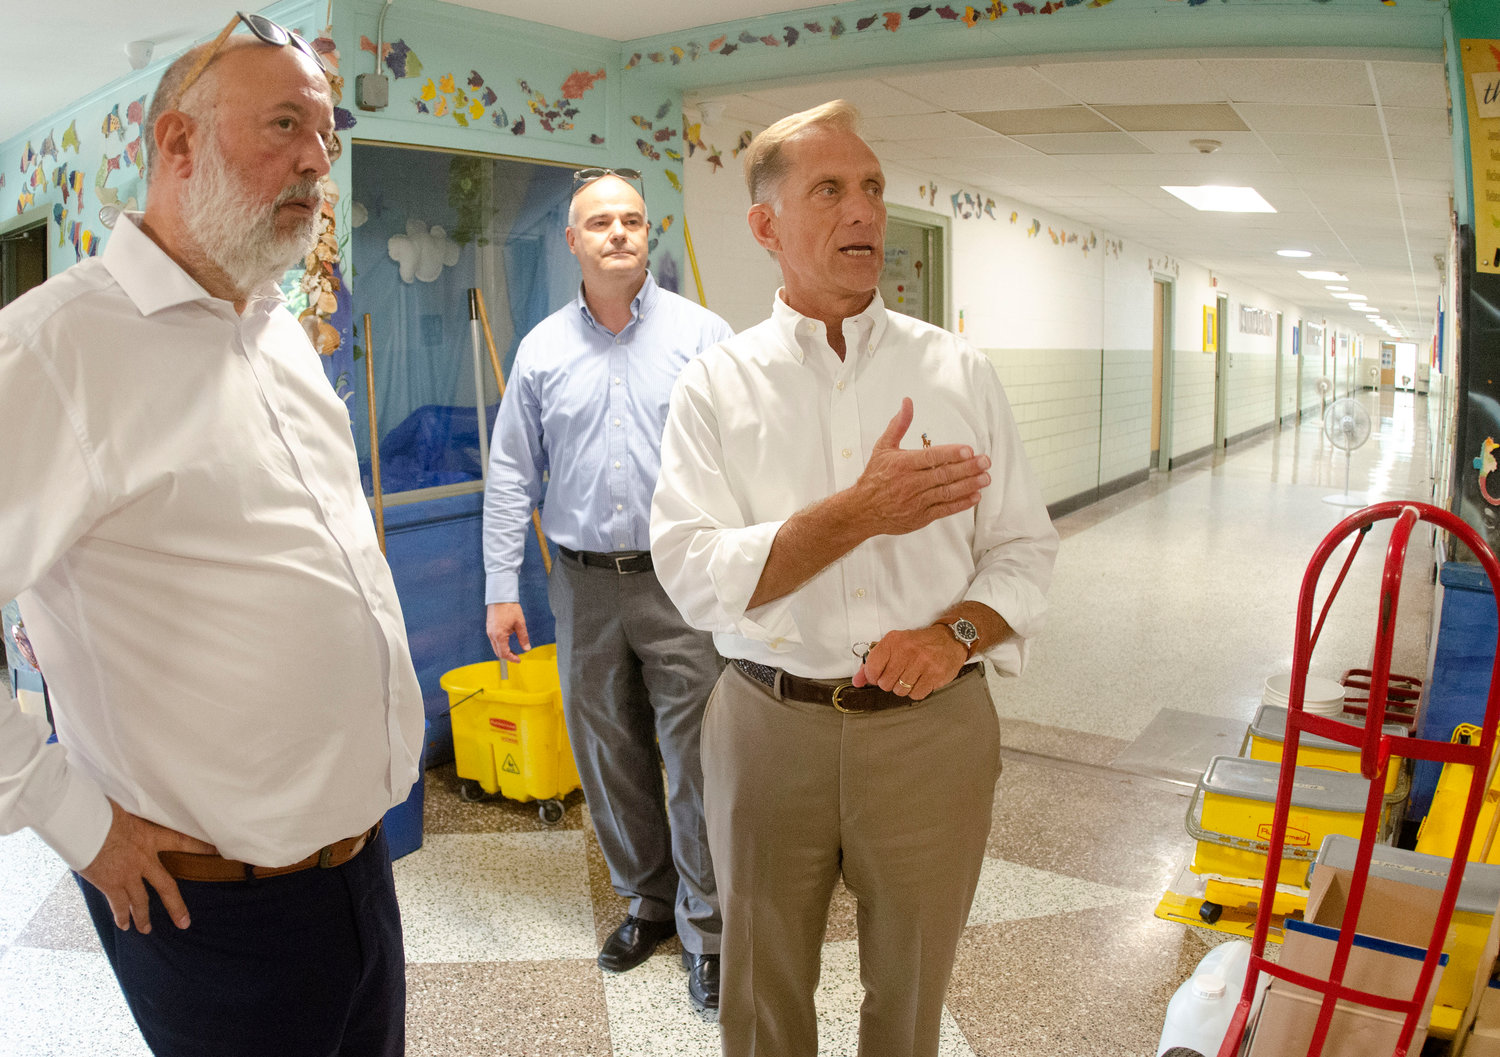 Barrington Superintendent of Schools Michael Messore (right) and finance director Doug Fiore (center) lead a tour for Joseph DaSilva, the coordinator for the state’s school building authority (left).